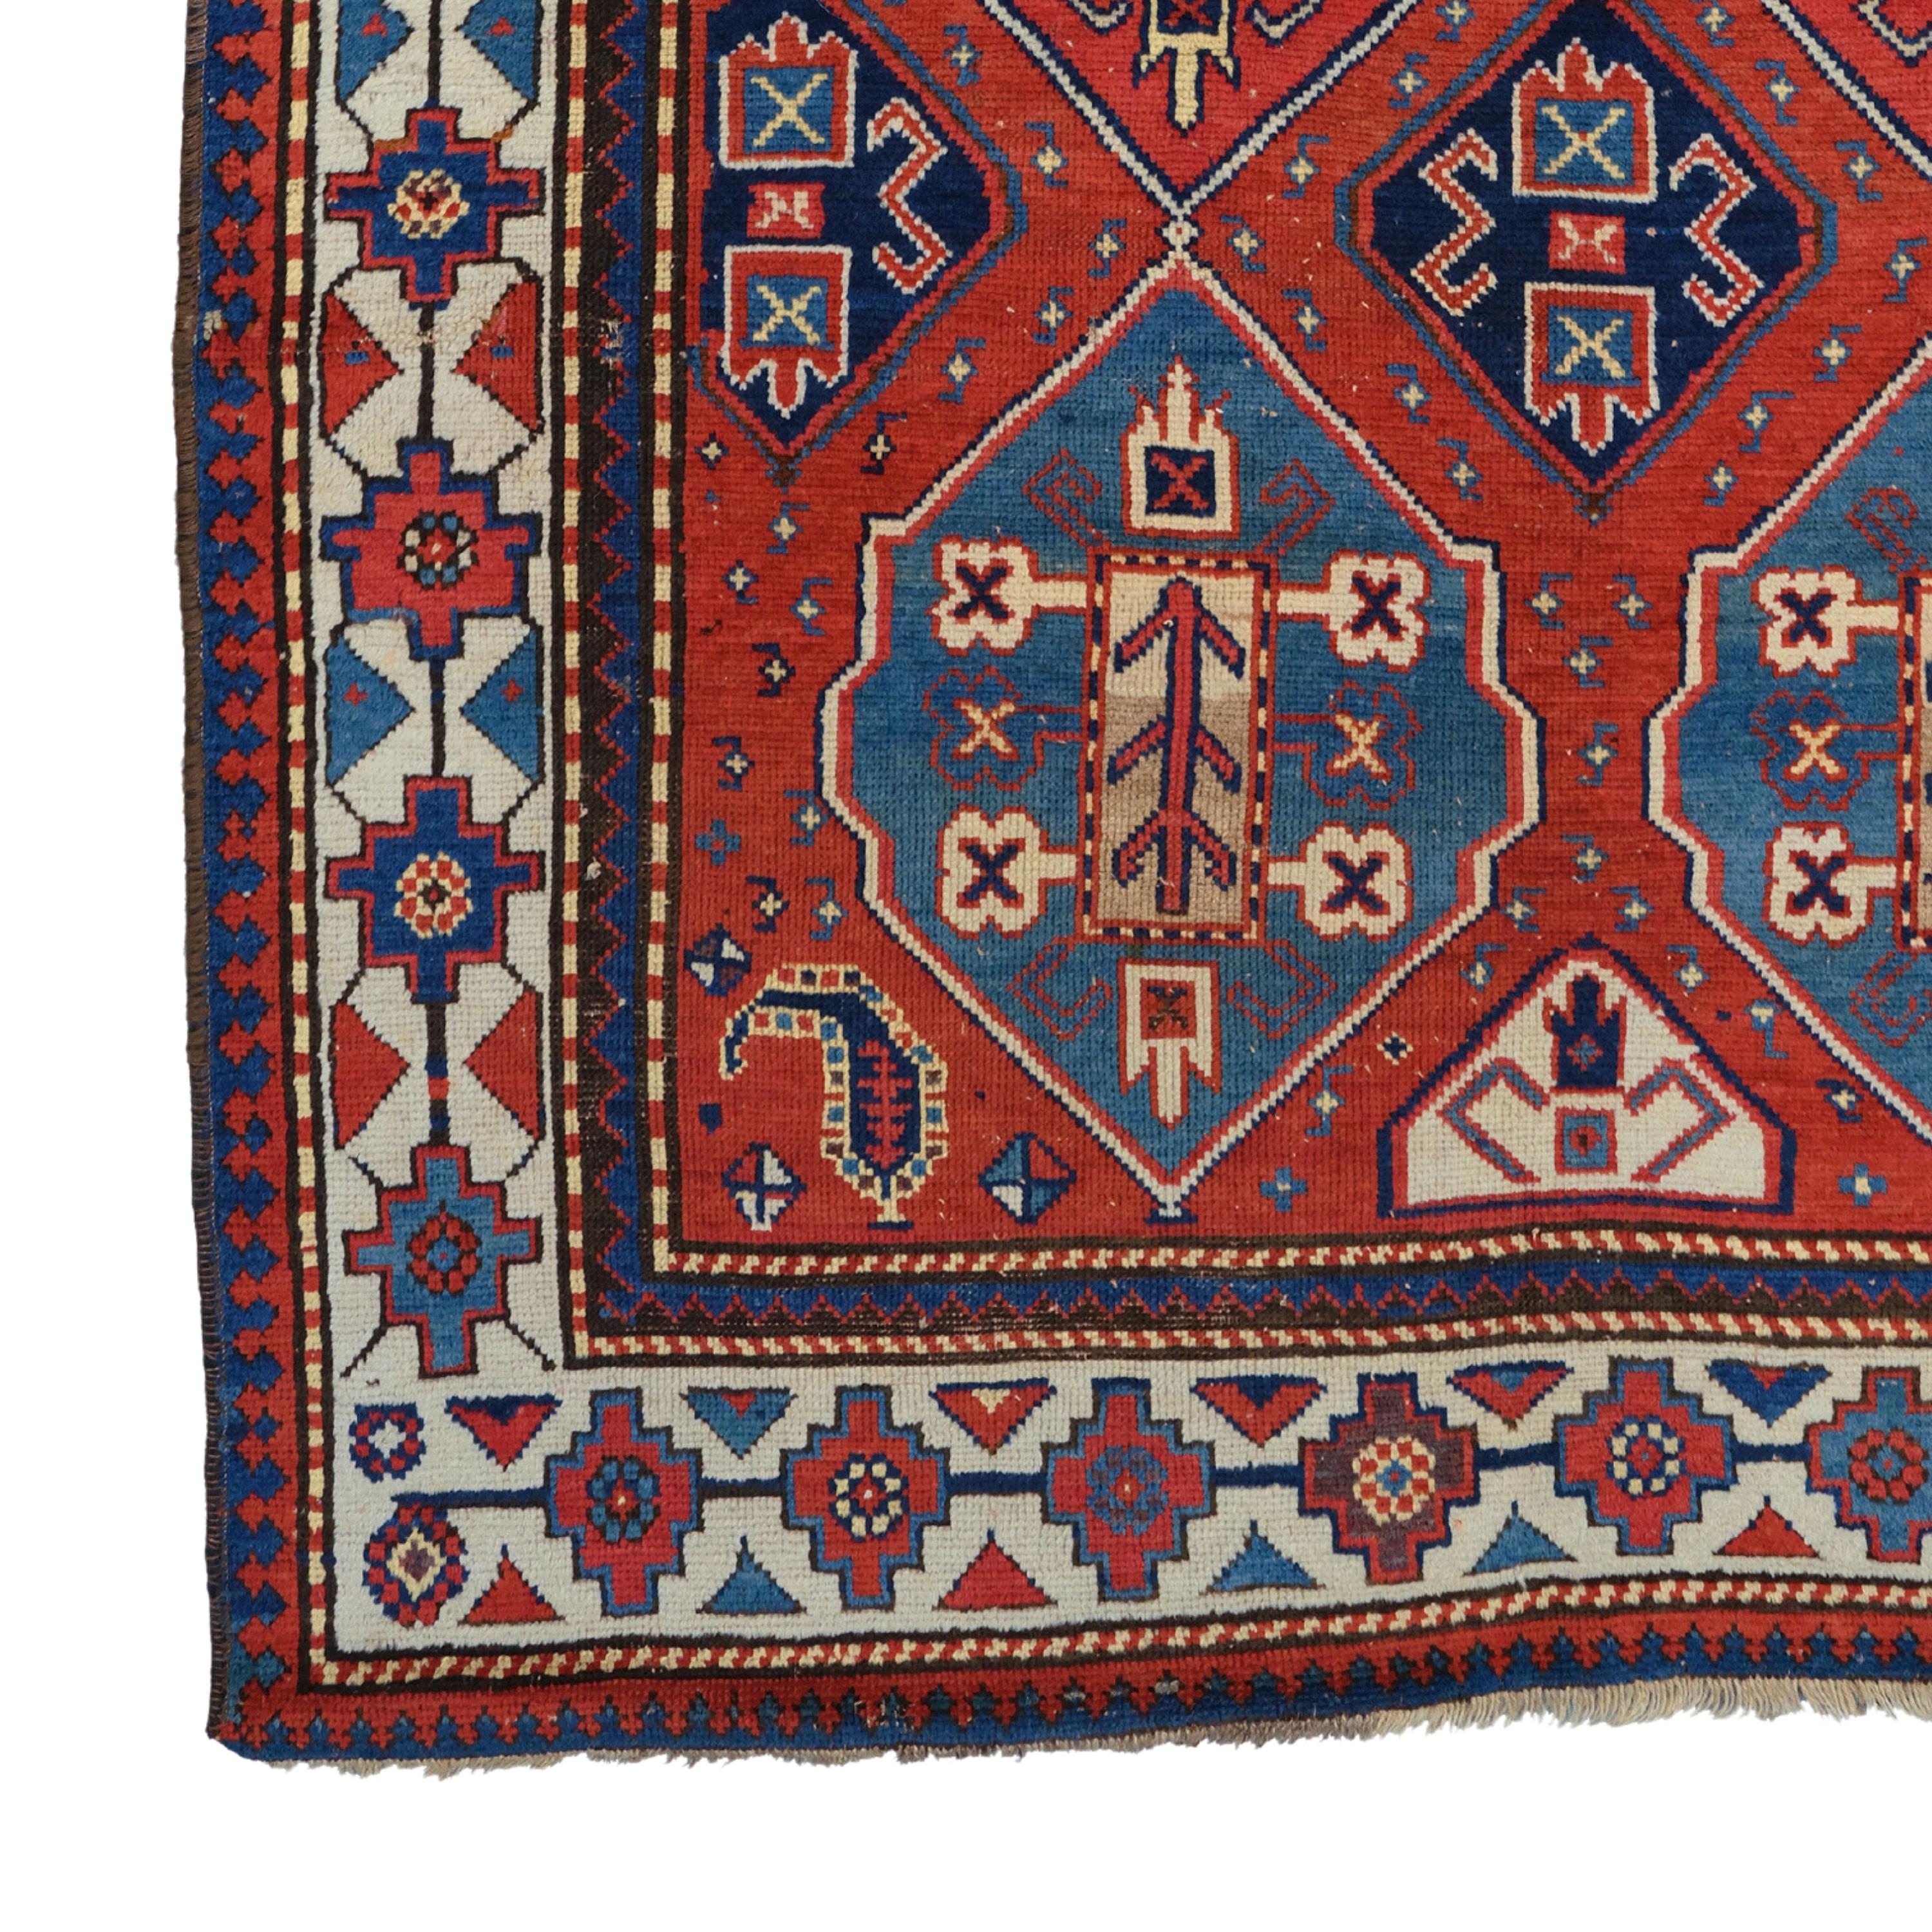 Antique Caucasian Rug
19th Century Antique Caucasian Rug
Size: 142x234 cm  7,90x7,67 Ft

This 19th-century Caucasian rug adds nobility to any space with its historical beauty and artistic value. The rich color palette and detailed patterns are